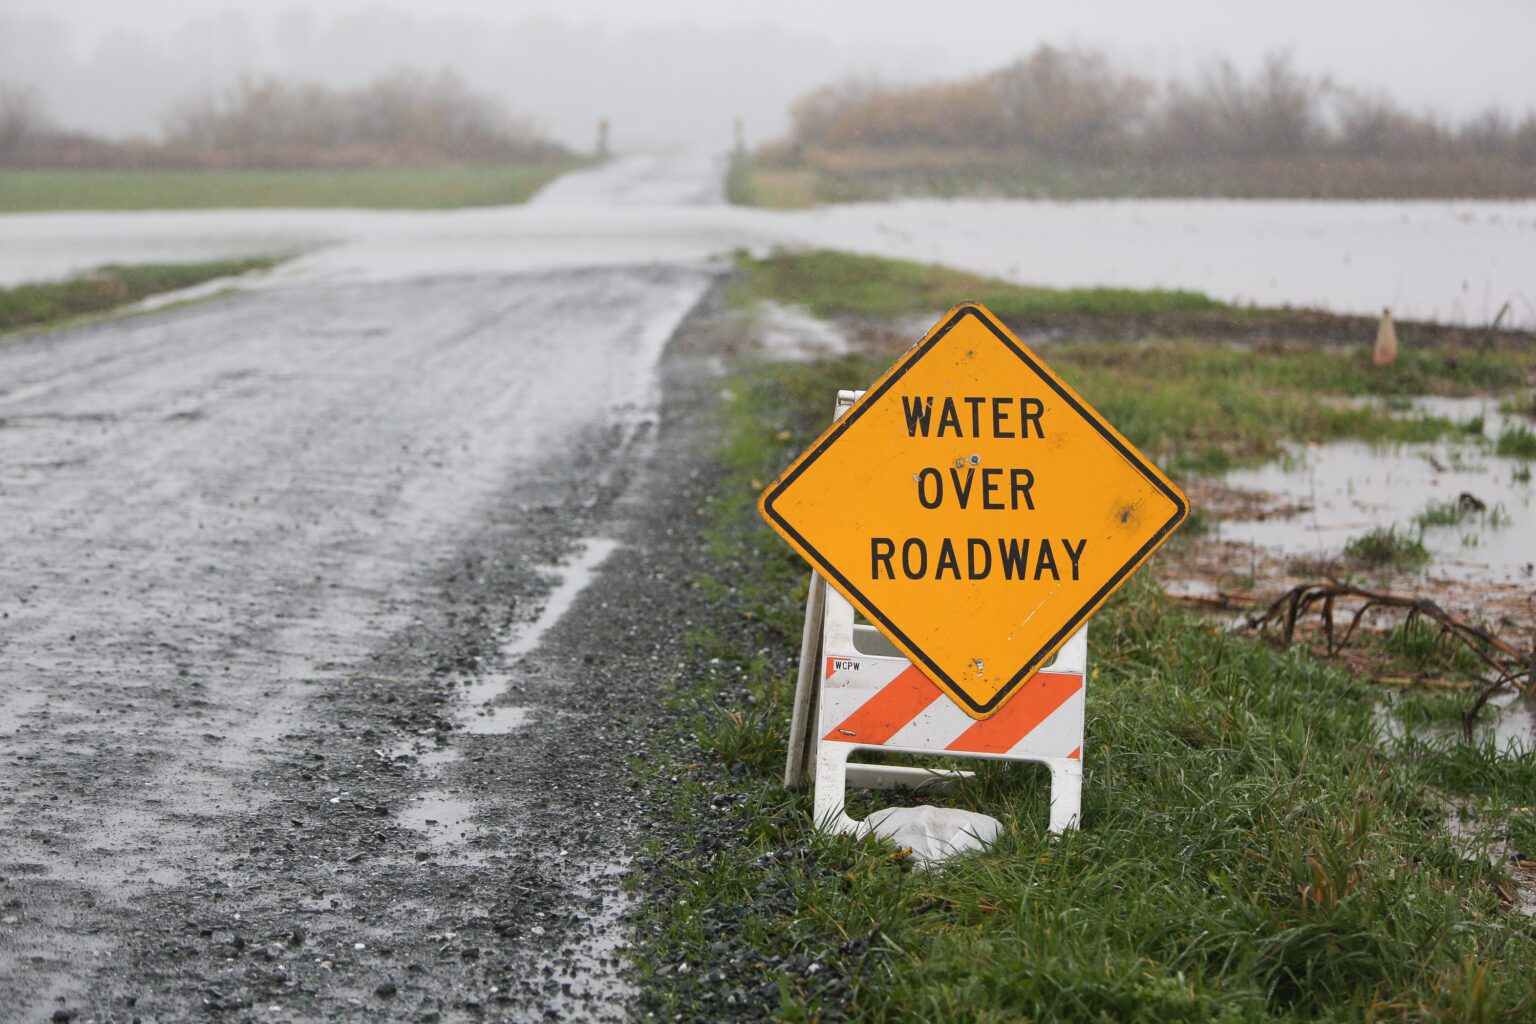 Water runs over a road in Lynden on Nov. 14